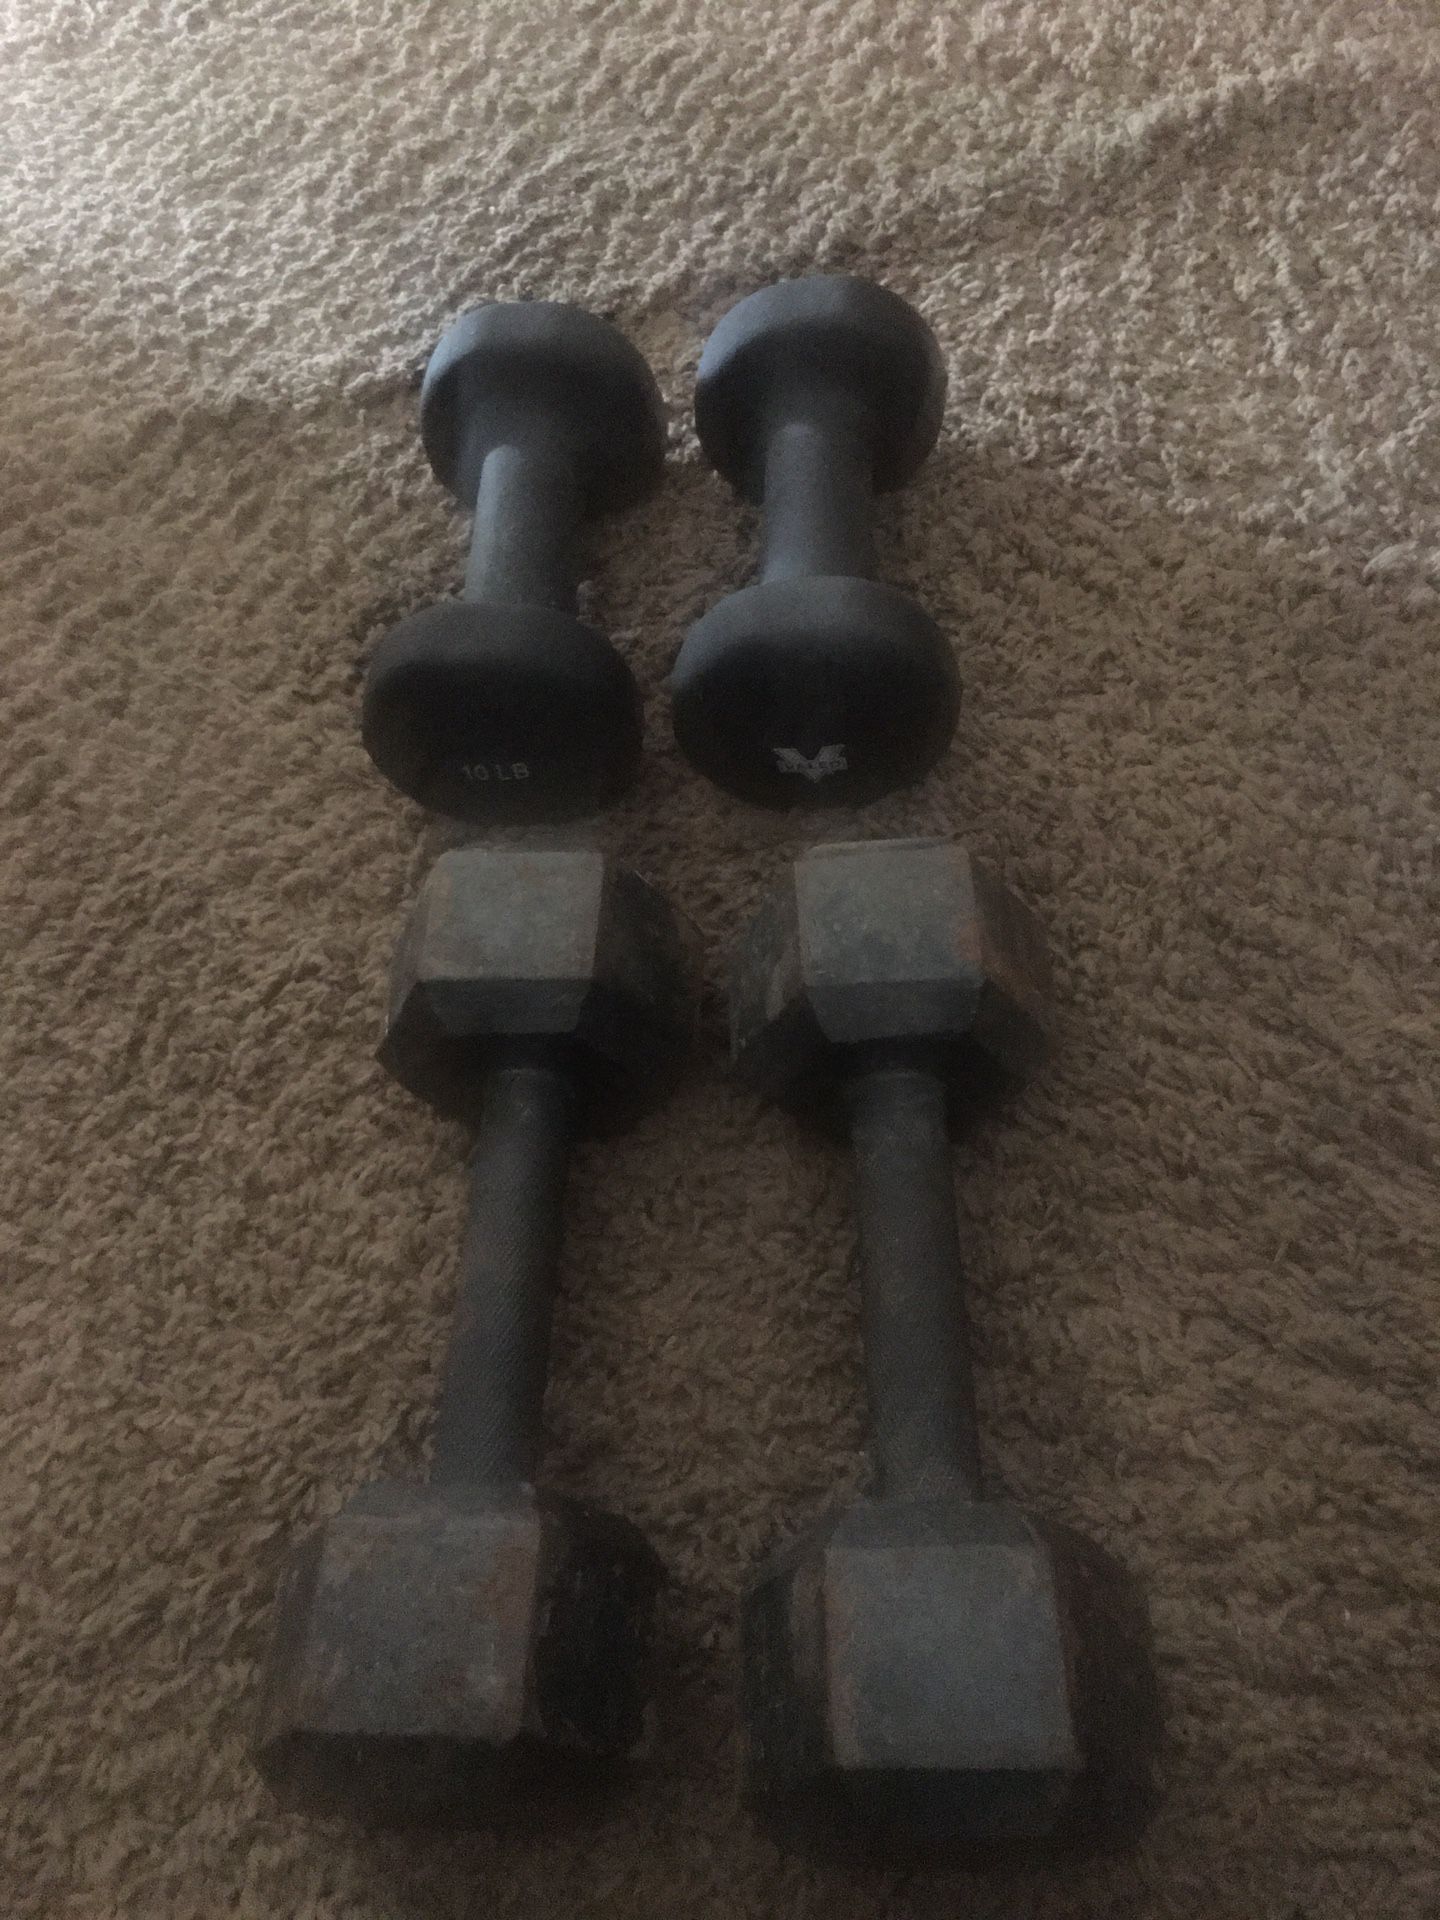 20lb Dumbbell Weights 2 Sets 